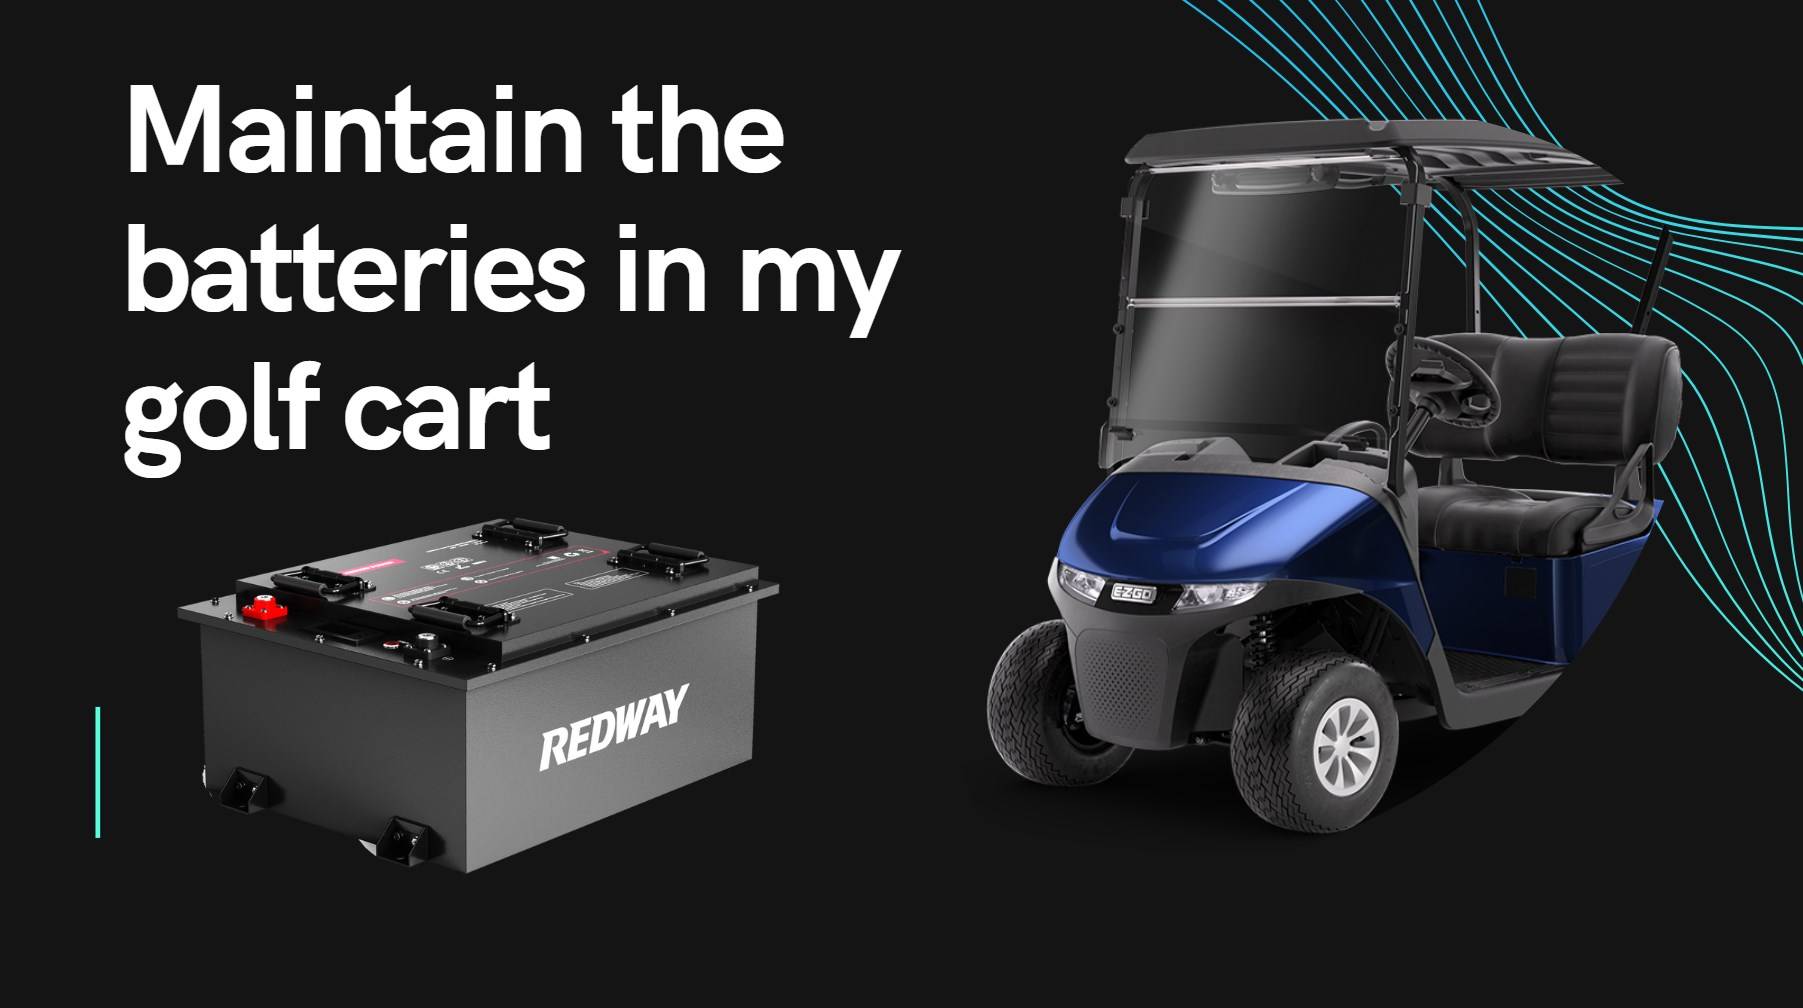 What steps should I take to properly maintain the batteries in my golf cart? 48V 150Ah golf cart lifepo4 battery redway